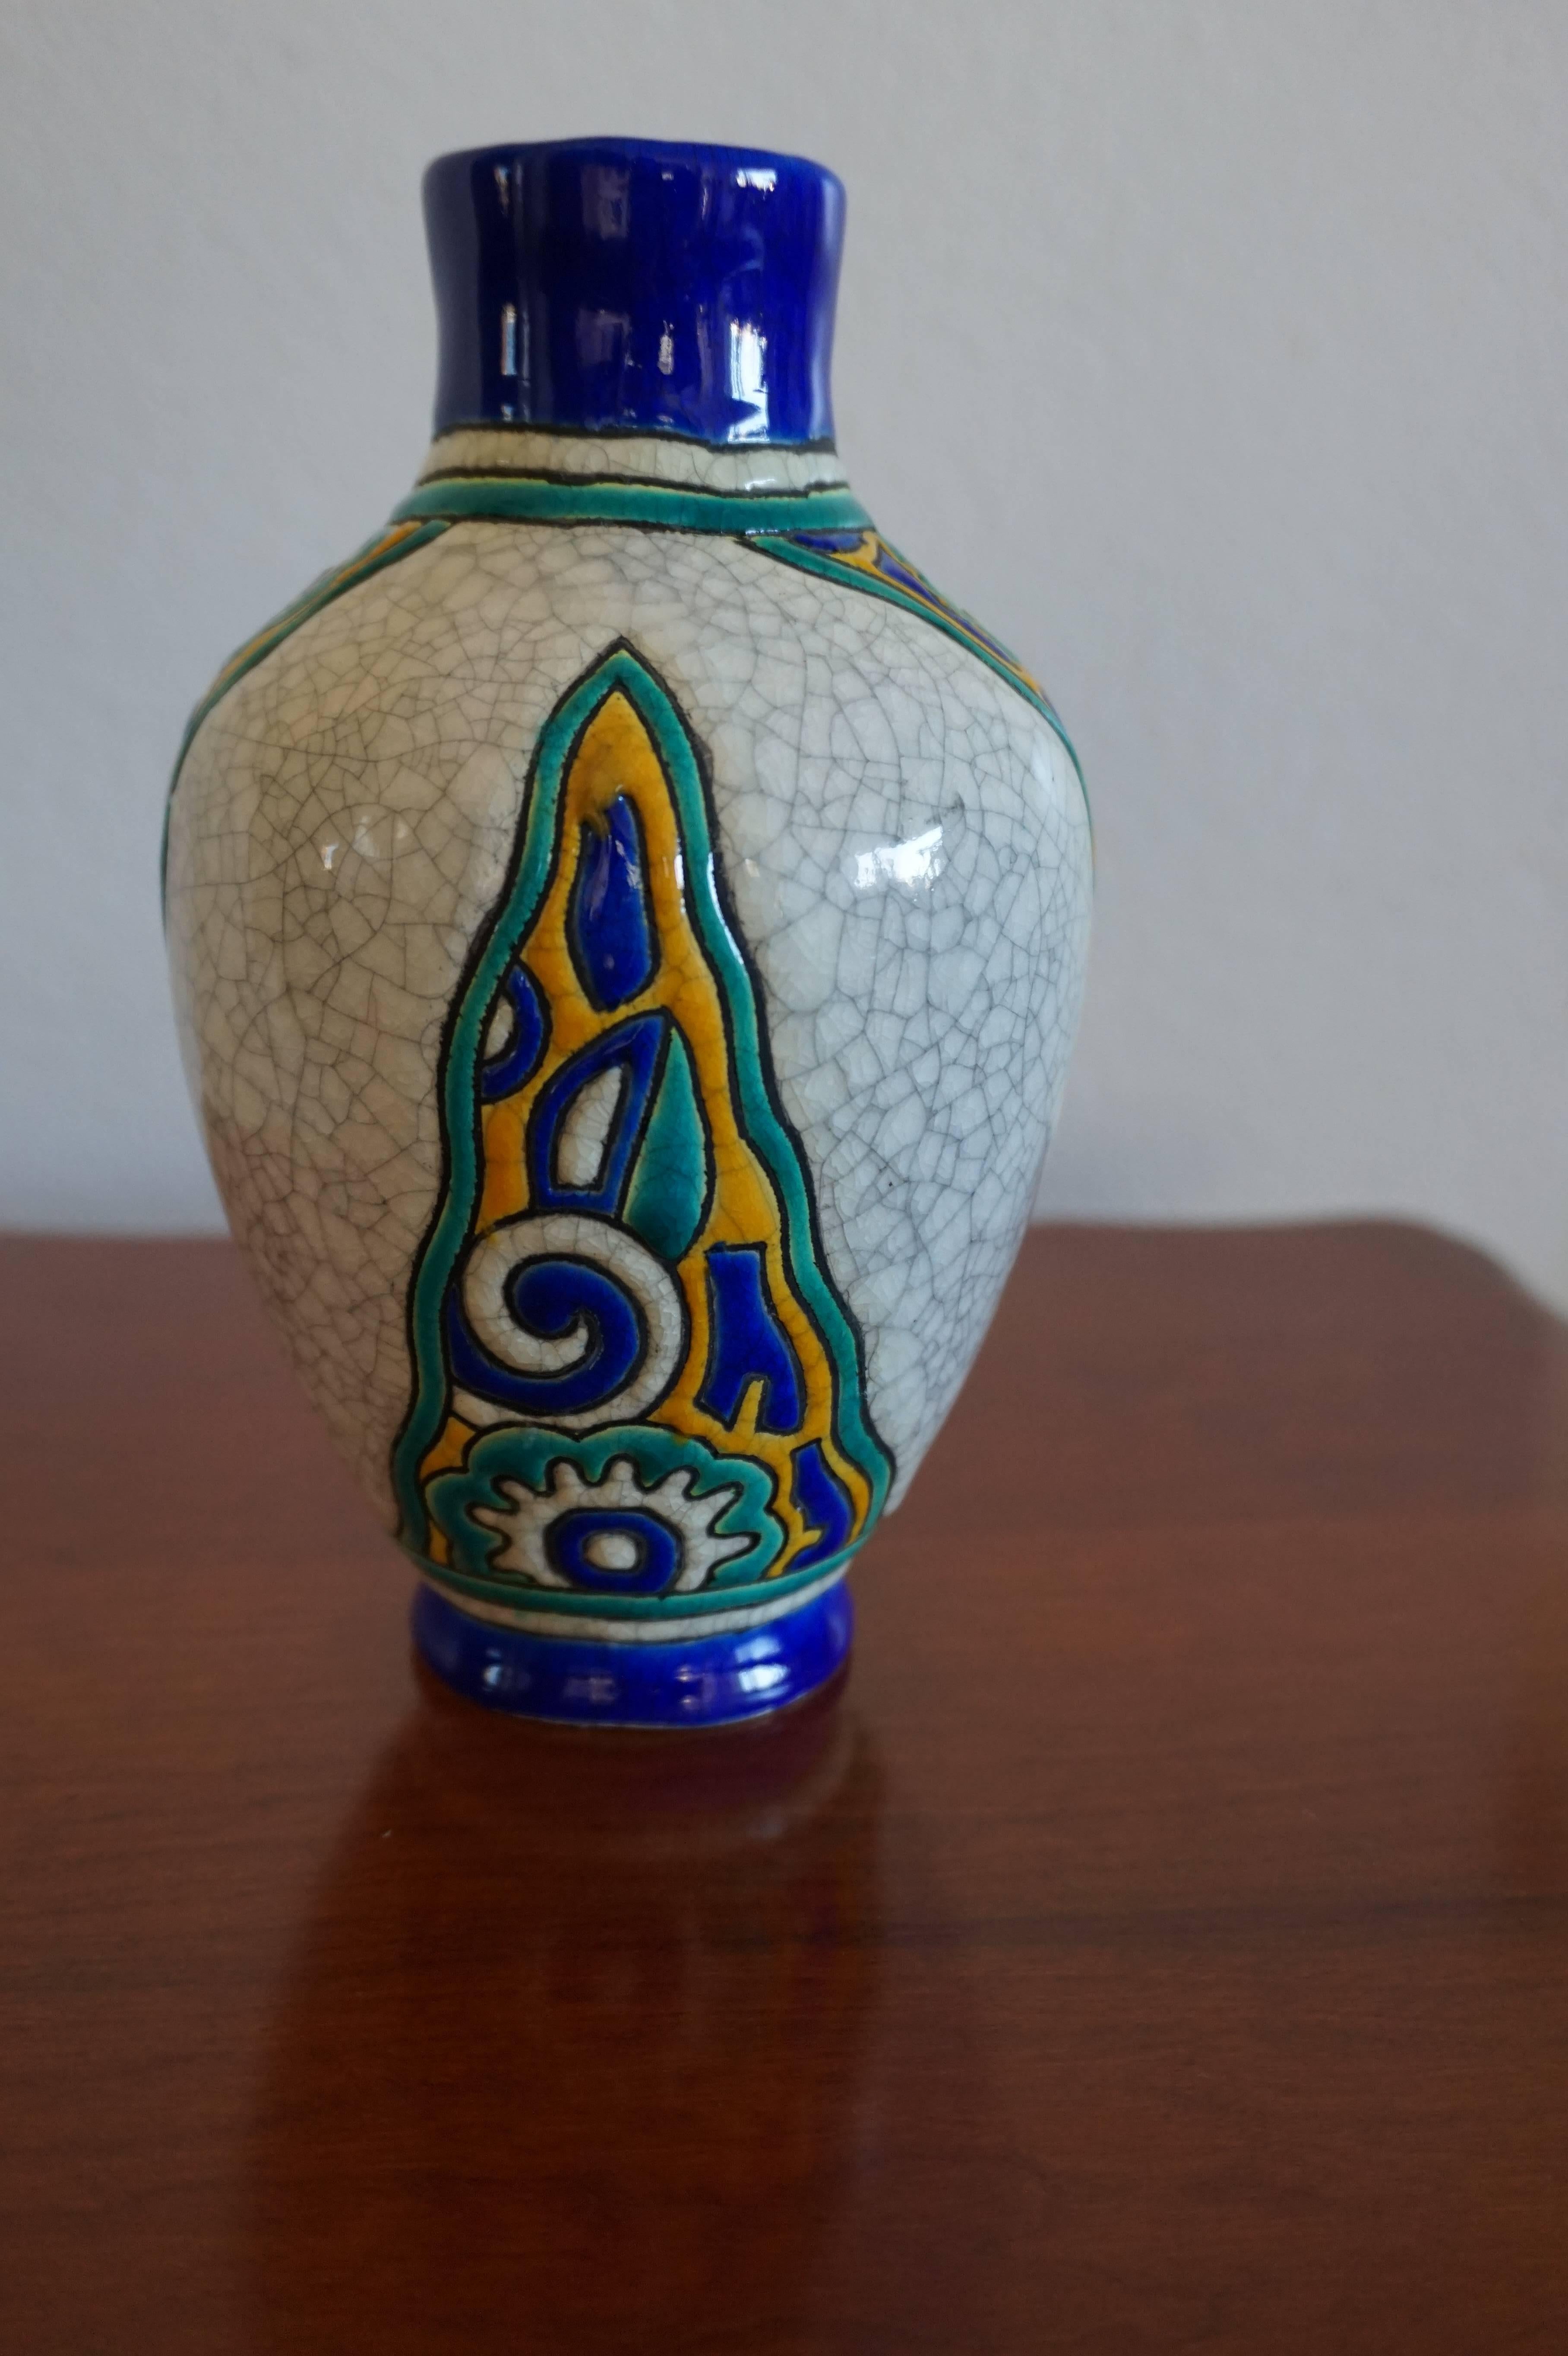 Rare and vibrant little Art Deco vase.

This 1930s vase comes with stunning and vibrant motifs of stylized flowers. It is relatively small in size, but it is a rare and impressive collector's item. There are no chips, cracks or restaurations and it